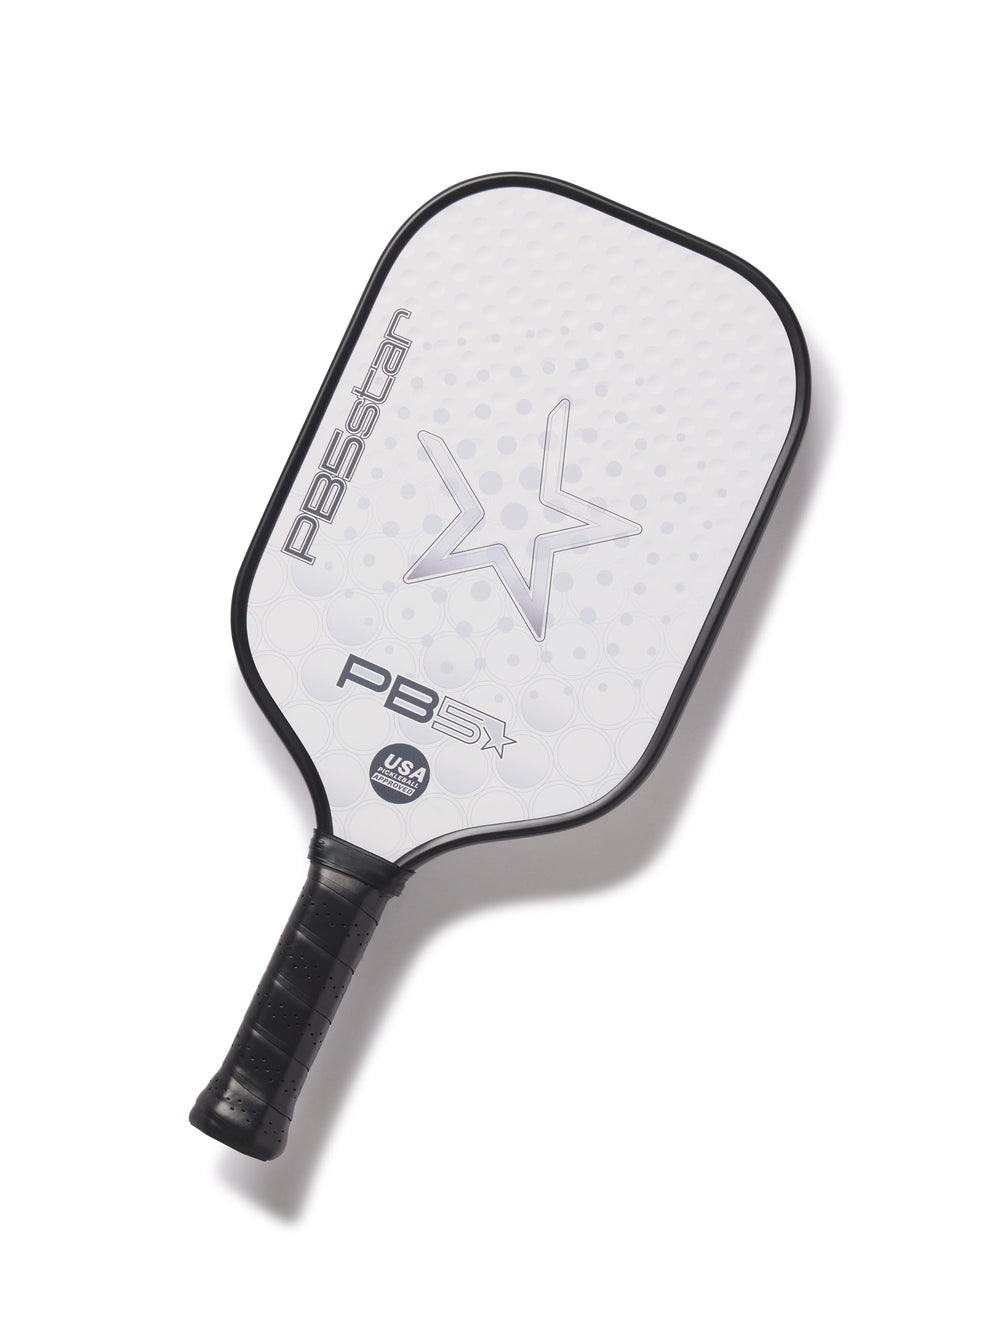 Balance Paddle full view in white with black edge guard and grip.